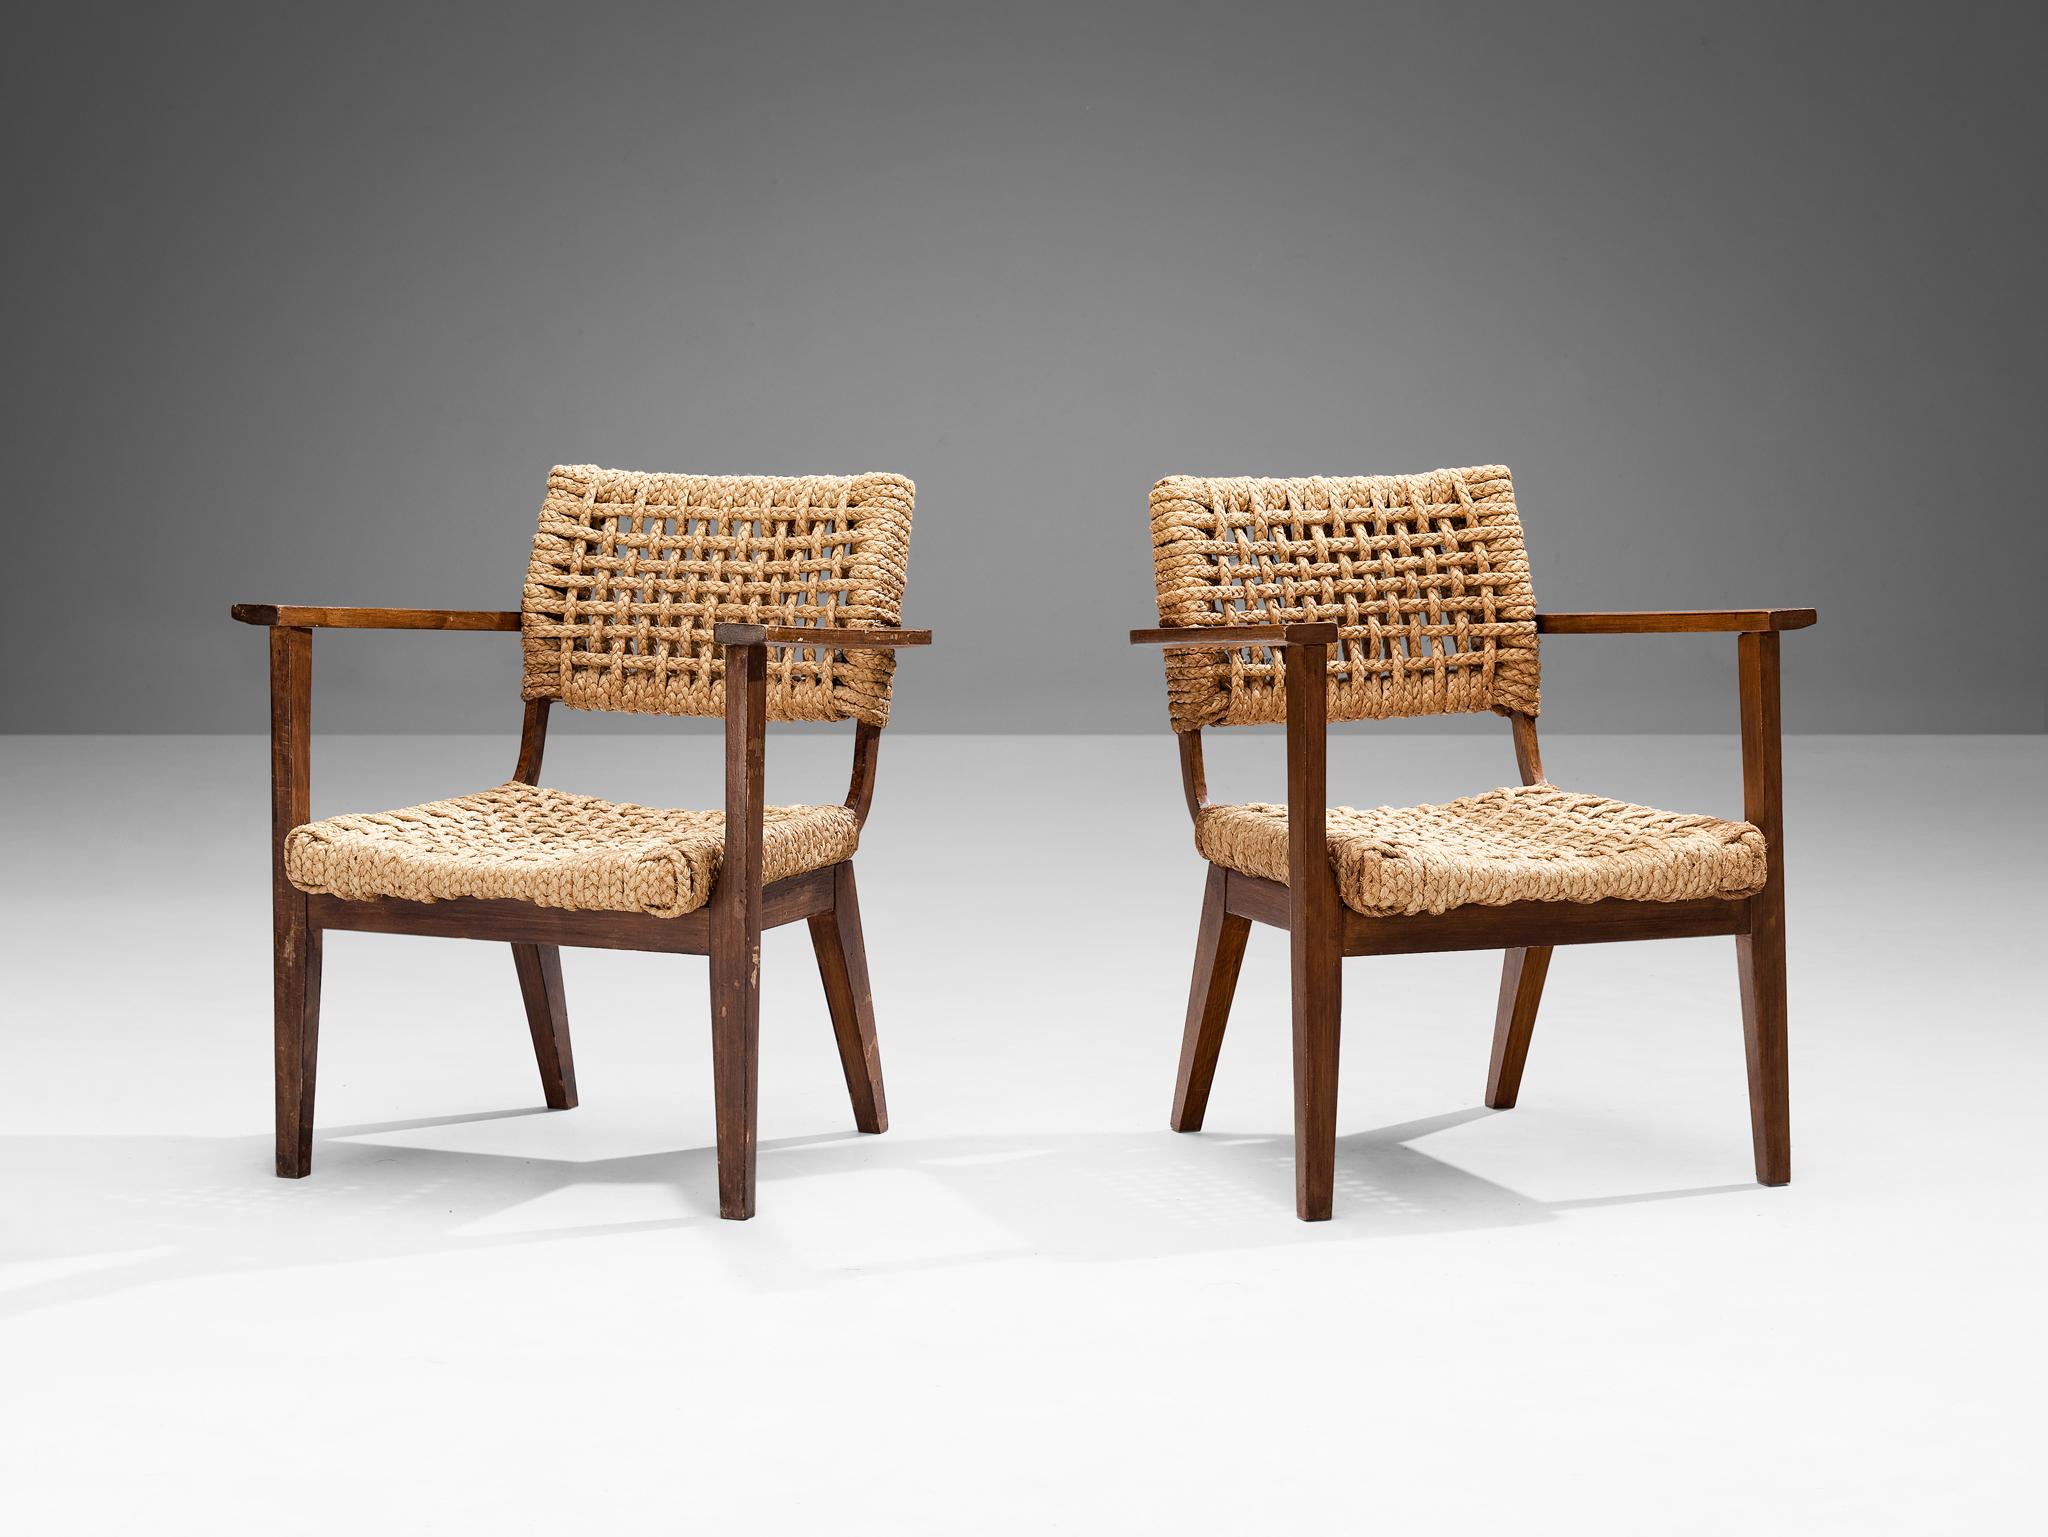 Adrien Audoux & Frida Minet for Vibo, pair of armchairs, stained beech, straw, France, 1950s

Pair of armchairs designed by the duo Adrien Audoux and Frida Minet. The seating and backrest are made of woven hemp from the abaca plant which is close to